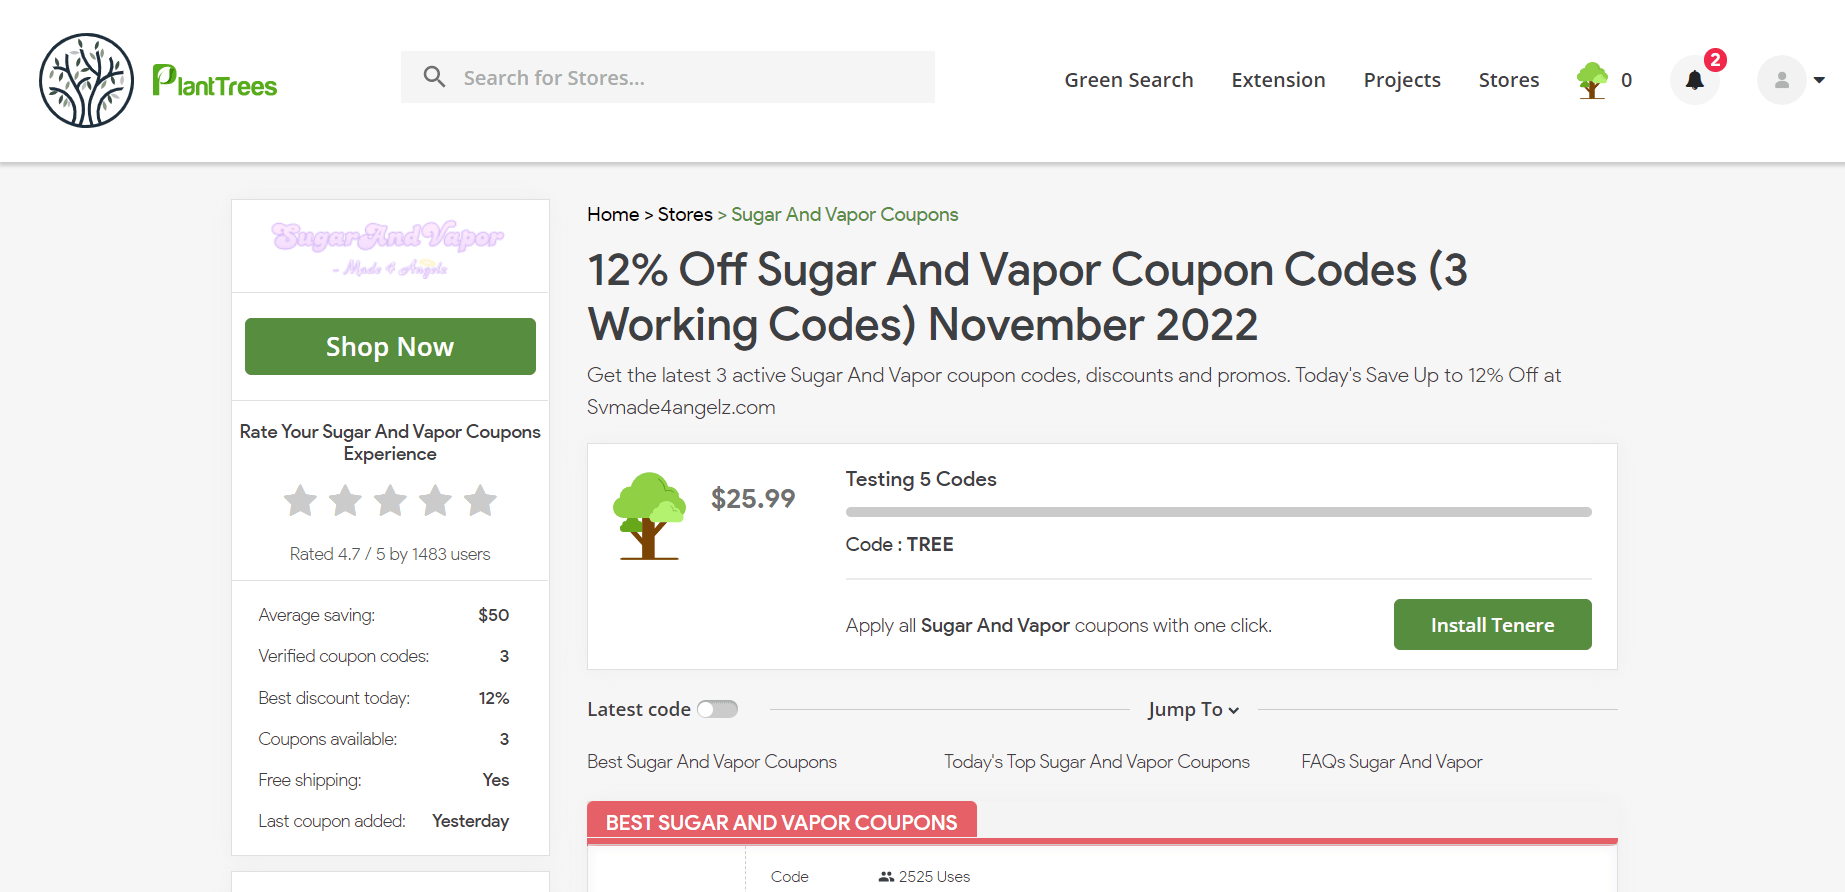 How to use Sugar and Vapor coupon 2